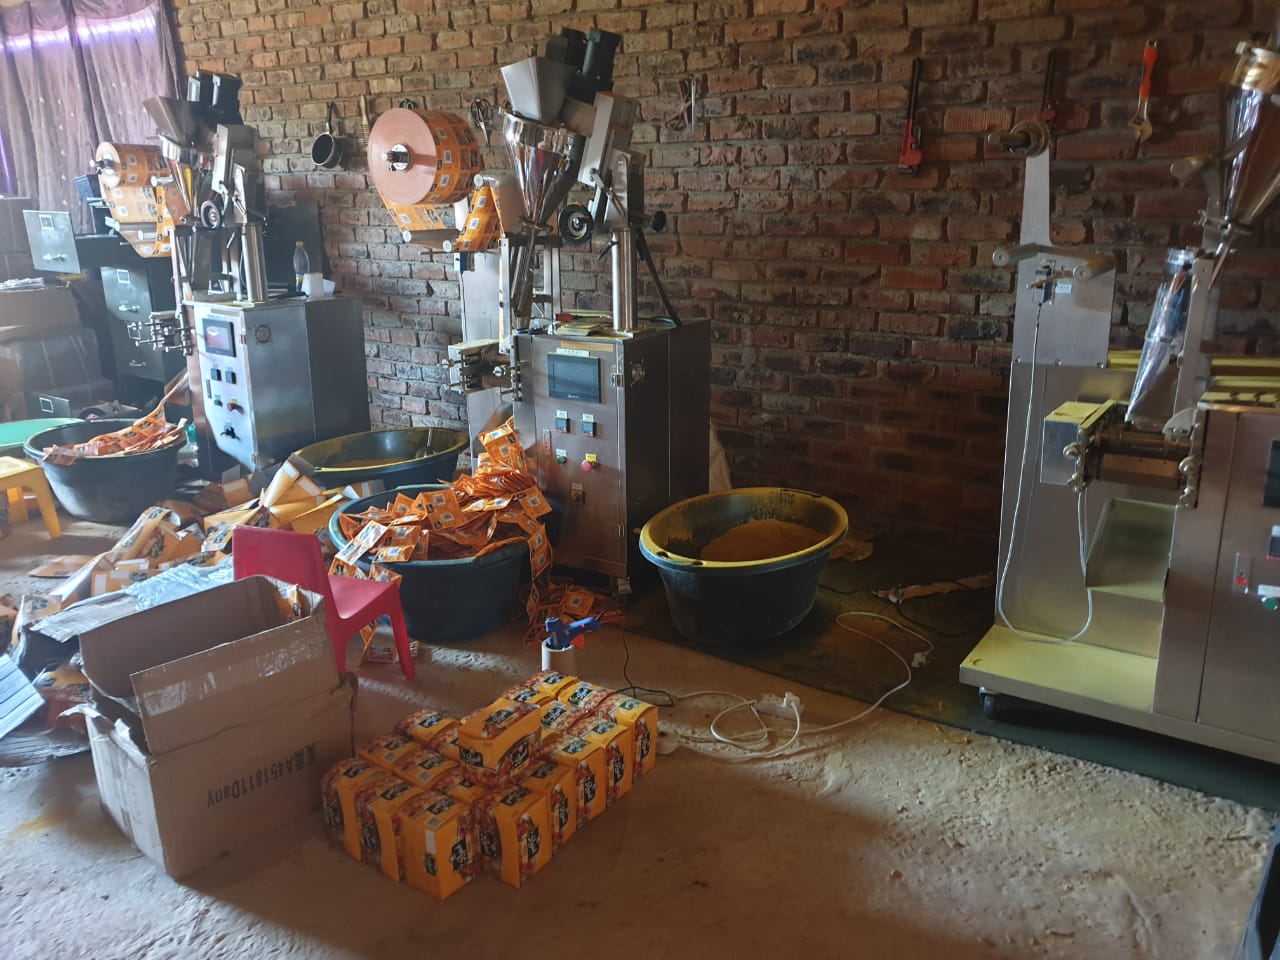 Police pounce on counterfeit spice factory as efforts are intensified to address the scourge of counterfeit goods